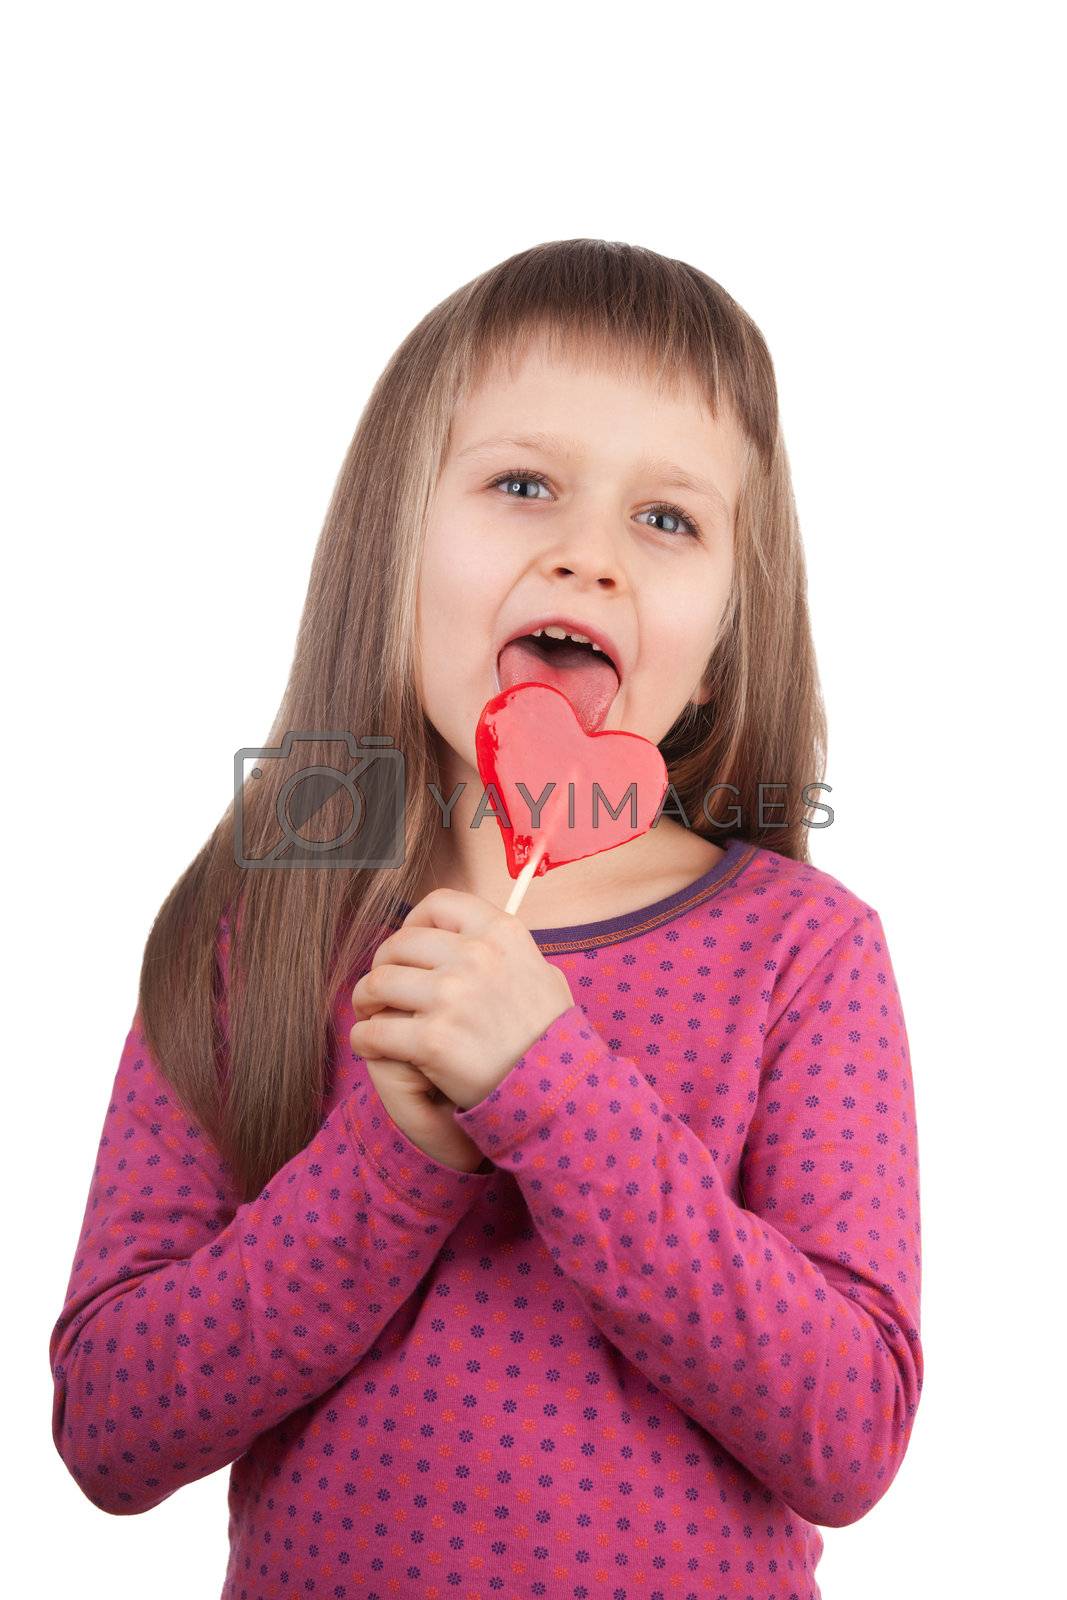 Royalty free image of Little girl 7-8 years old licking red heart lollipop isolated  by SergeyAK